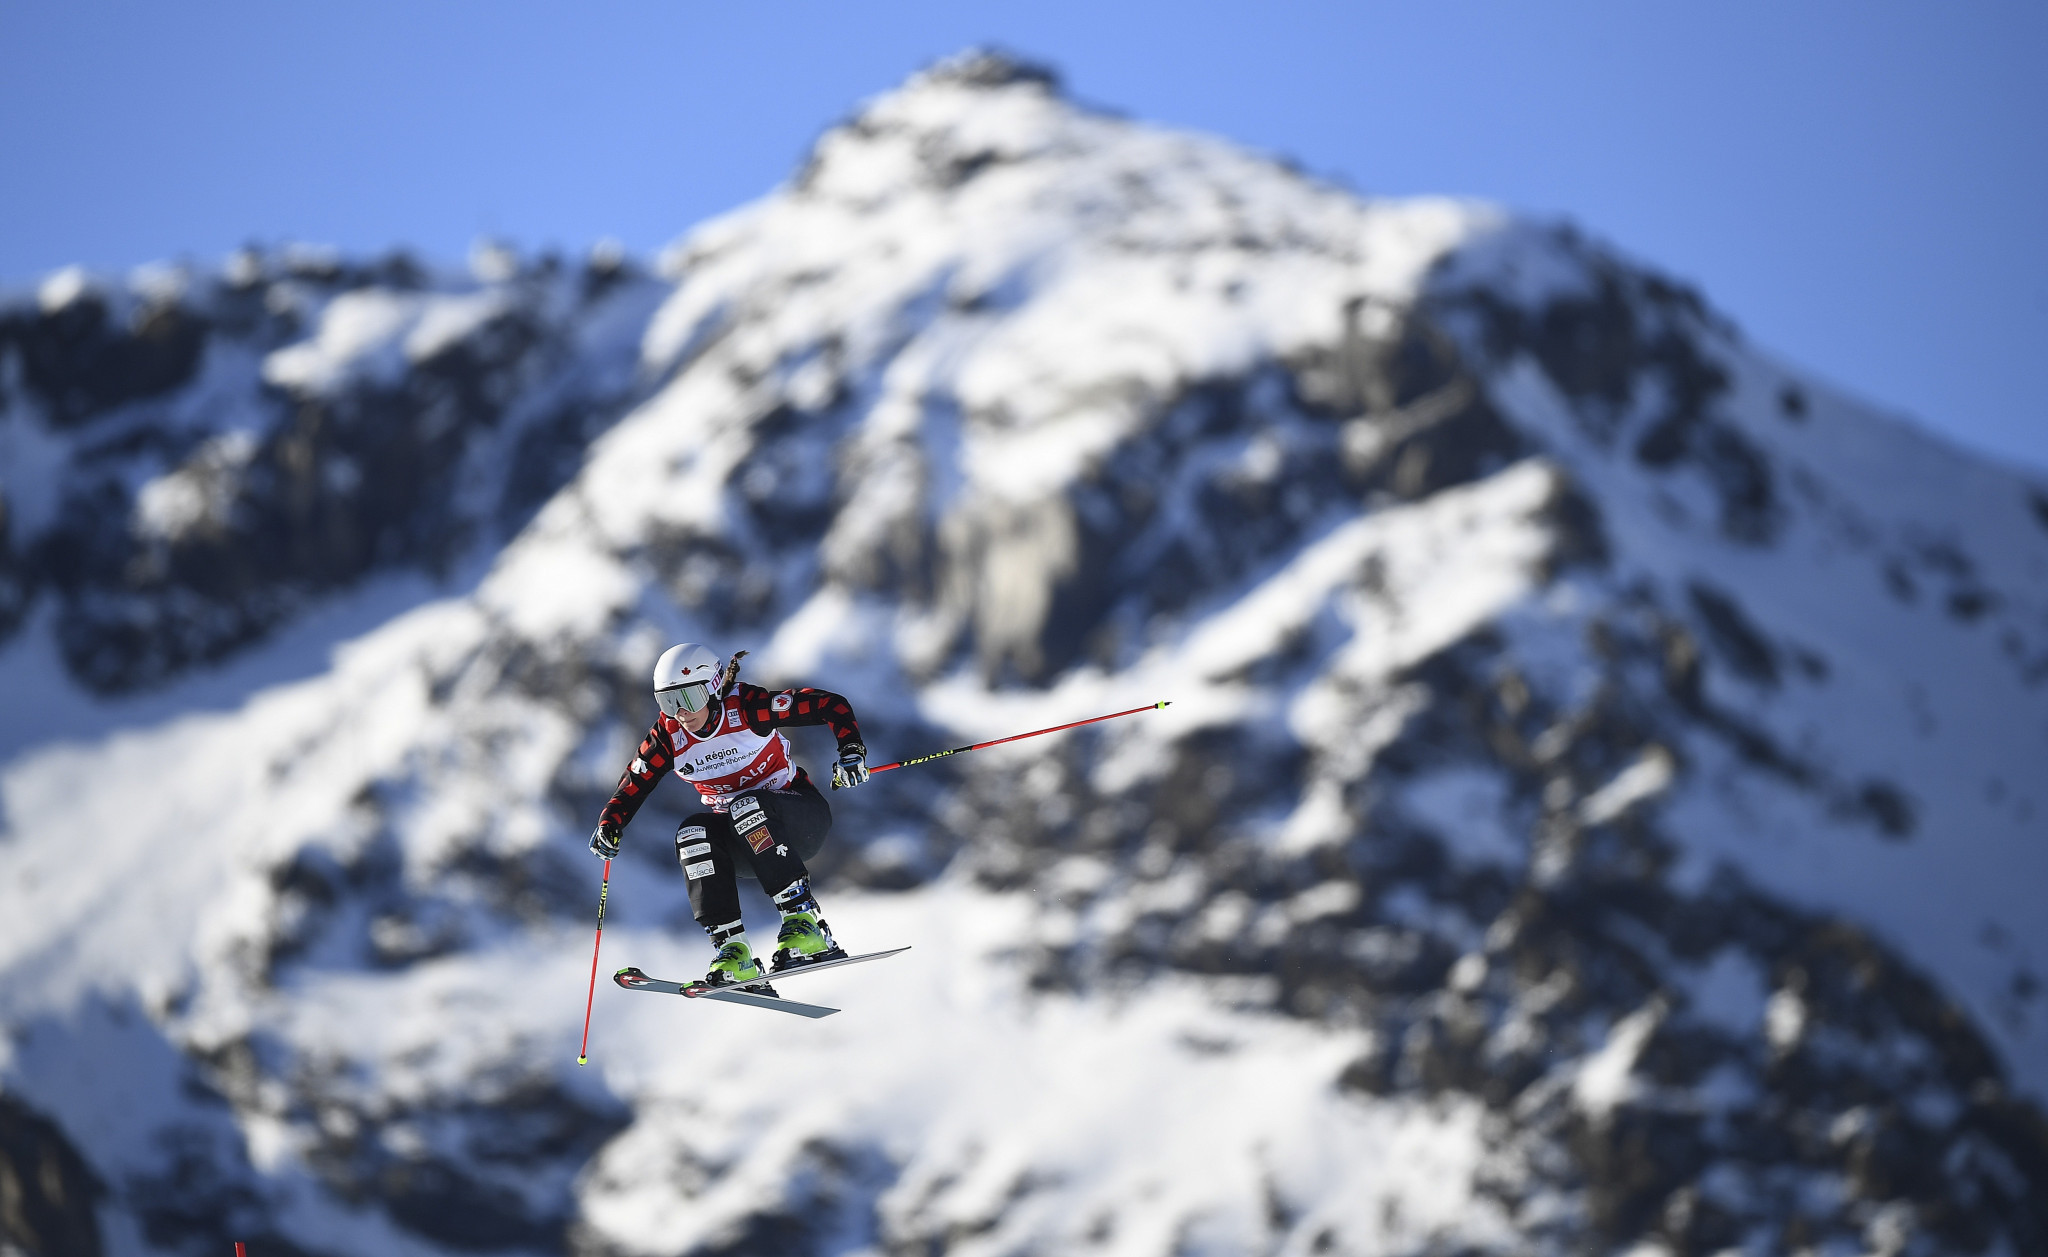 Canada's Marielle Thompson won last year's women's event in Montafon ©Getty Images